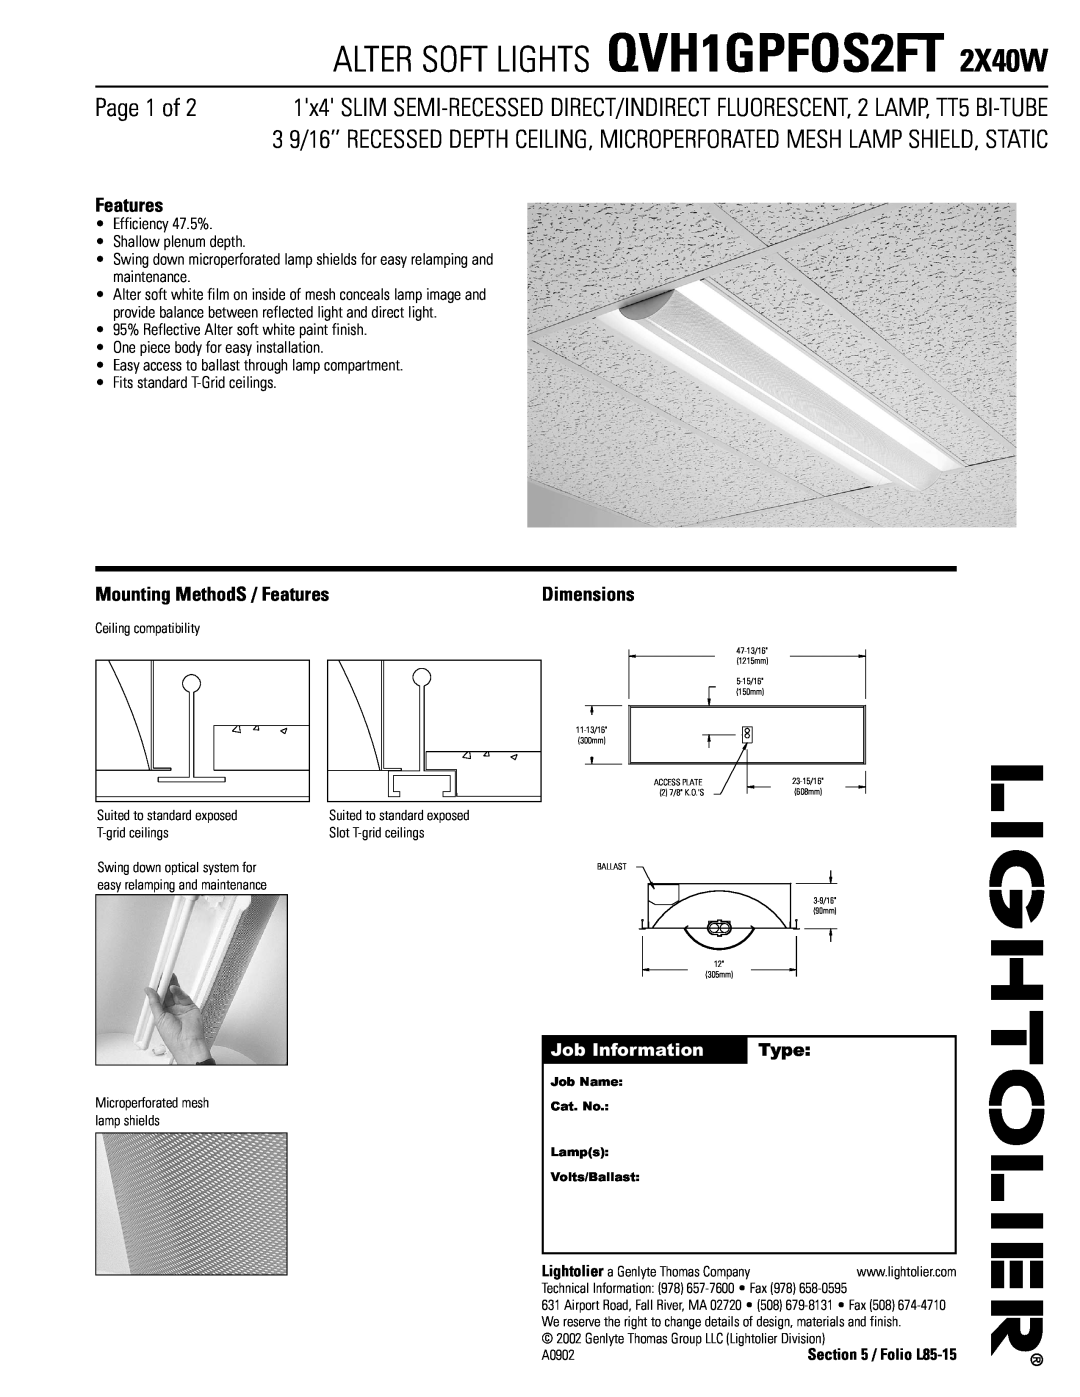 Lightolier dimensions ALTER SOFT LIGHTS QVH1GPFOS2FT 2X40W, Page 1 of, Mounting MethodS / Features 